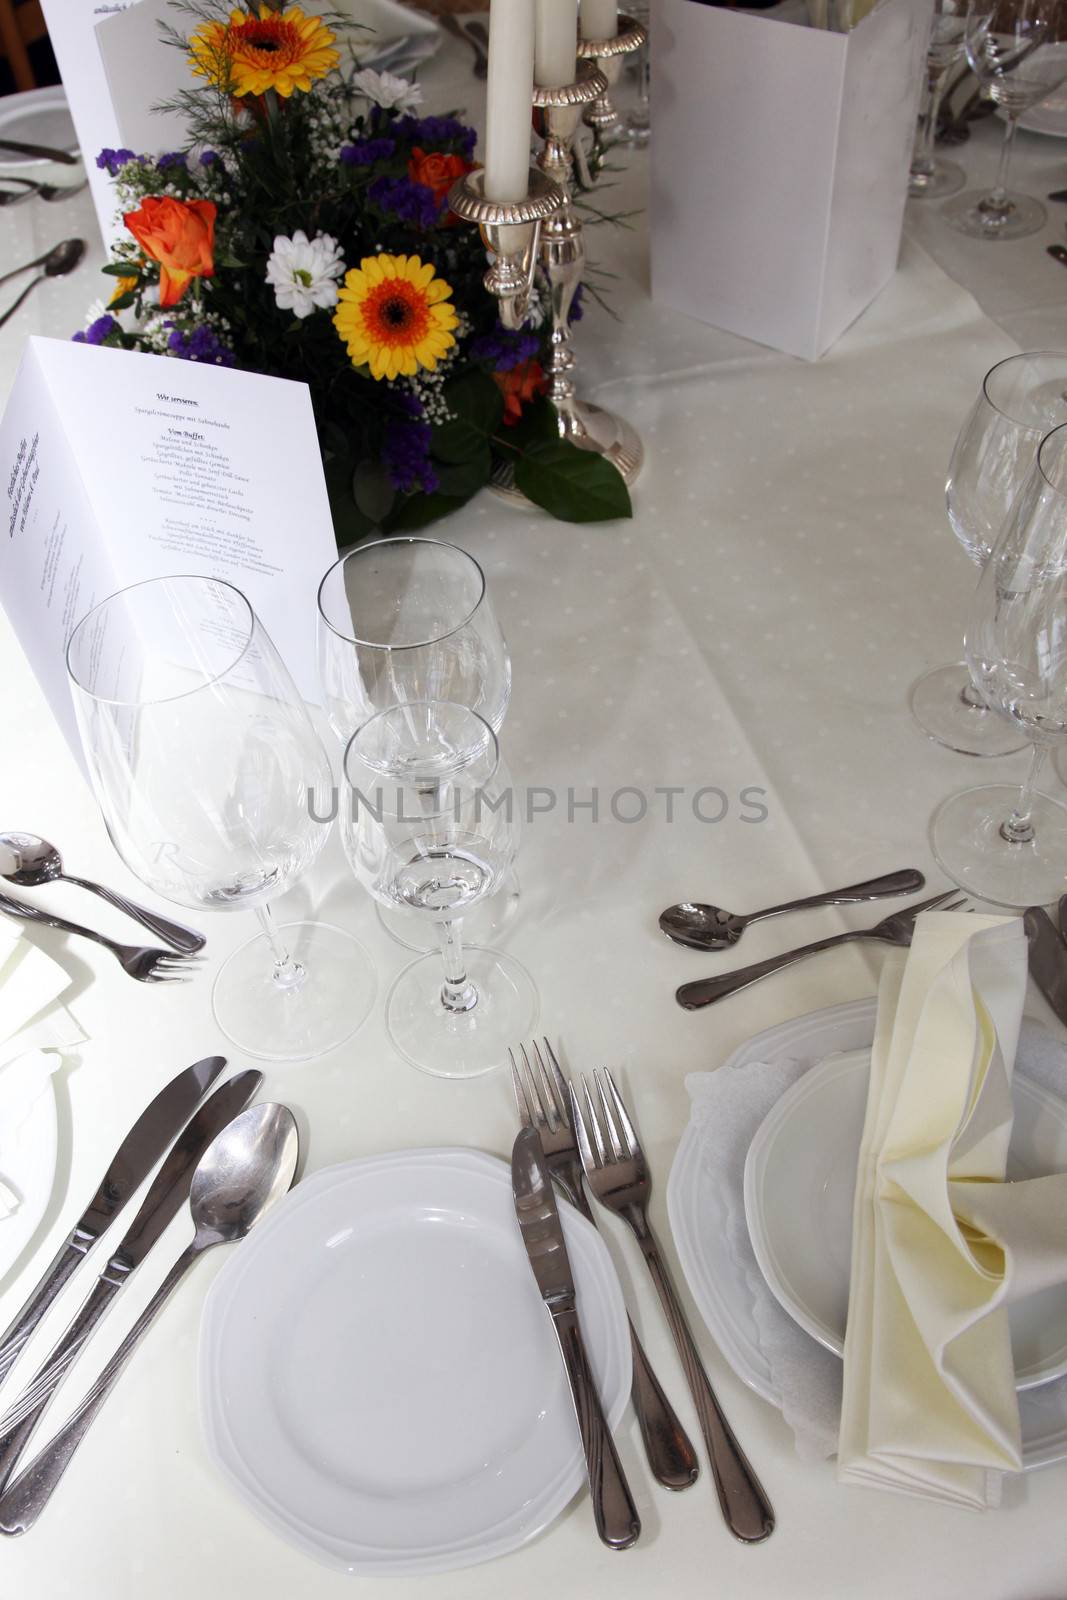 High angle view of a formal table setting at wedding reception or catered event with white linen, silverware, glassware, a menu and floral centrepice